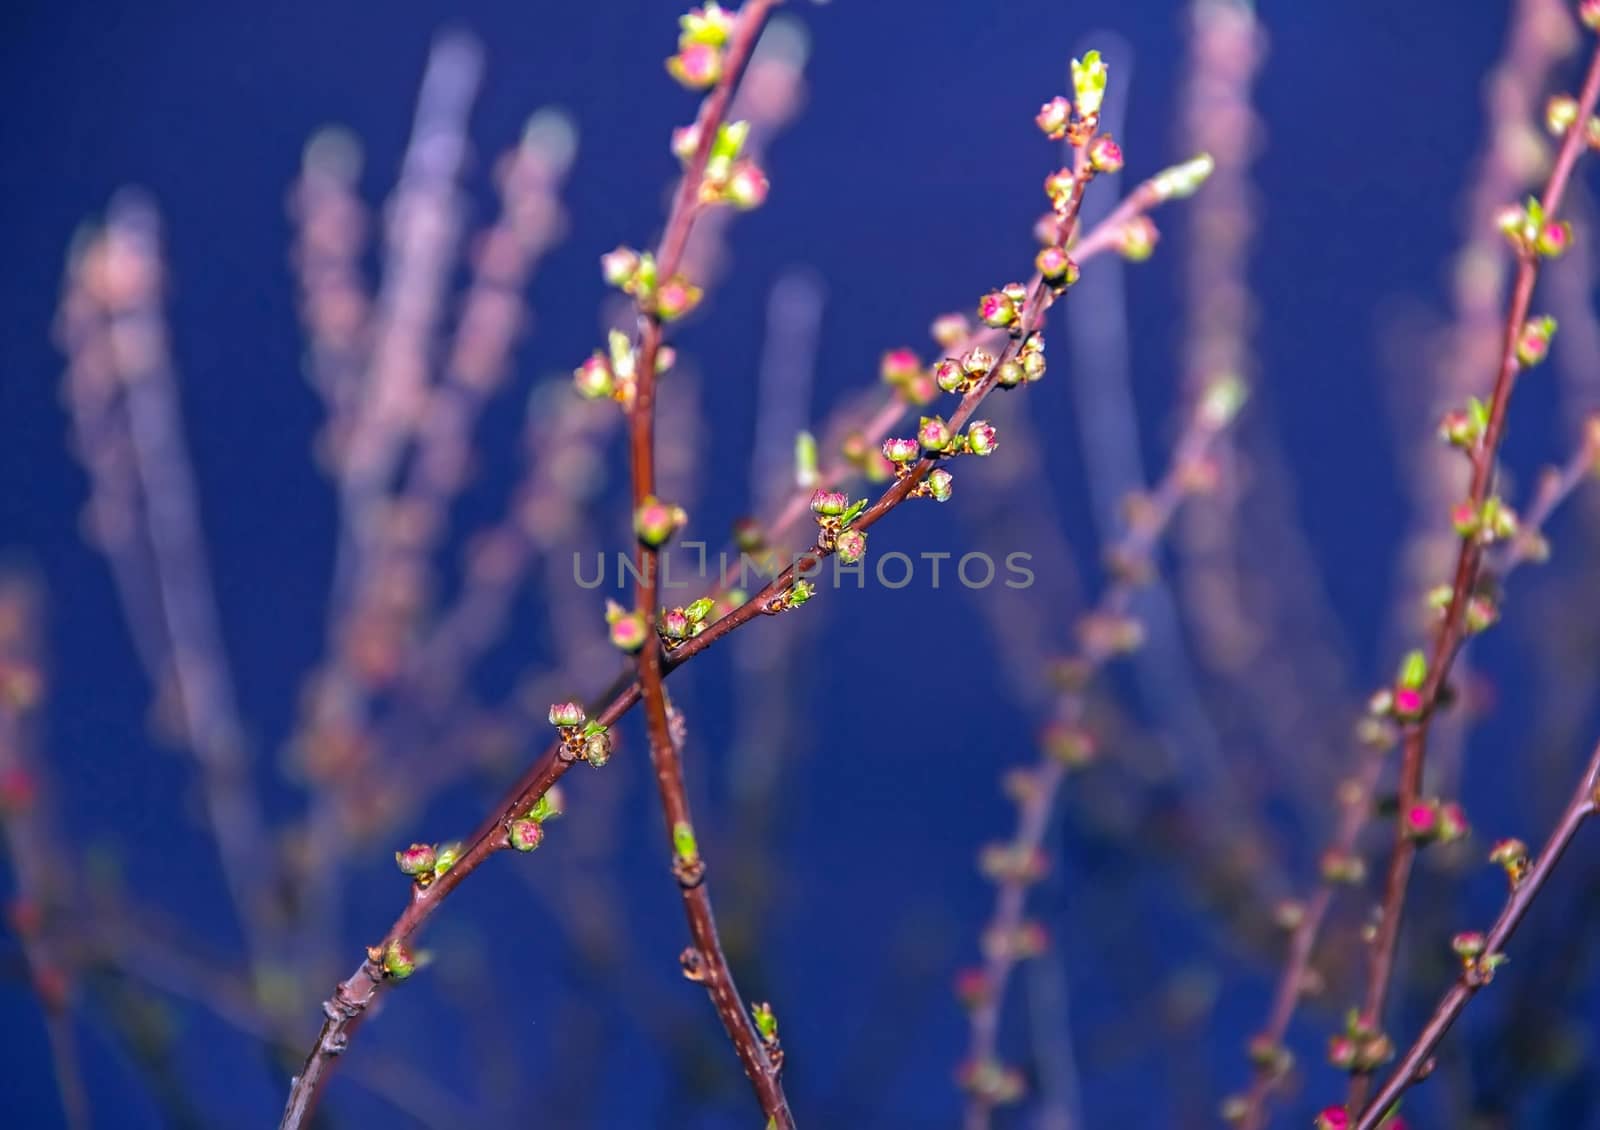 Pink cherry buds on a branch in the night sky. Close-up, rannya spring swollen buds of flowers, the flowers begin to bloom, evening